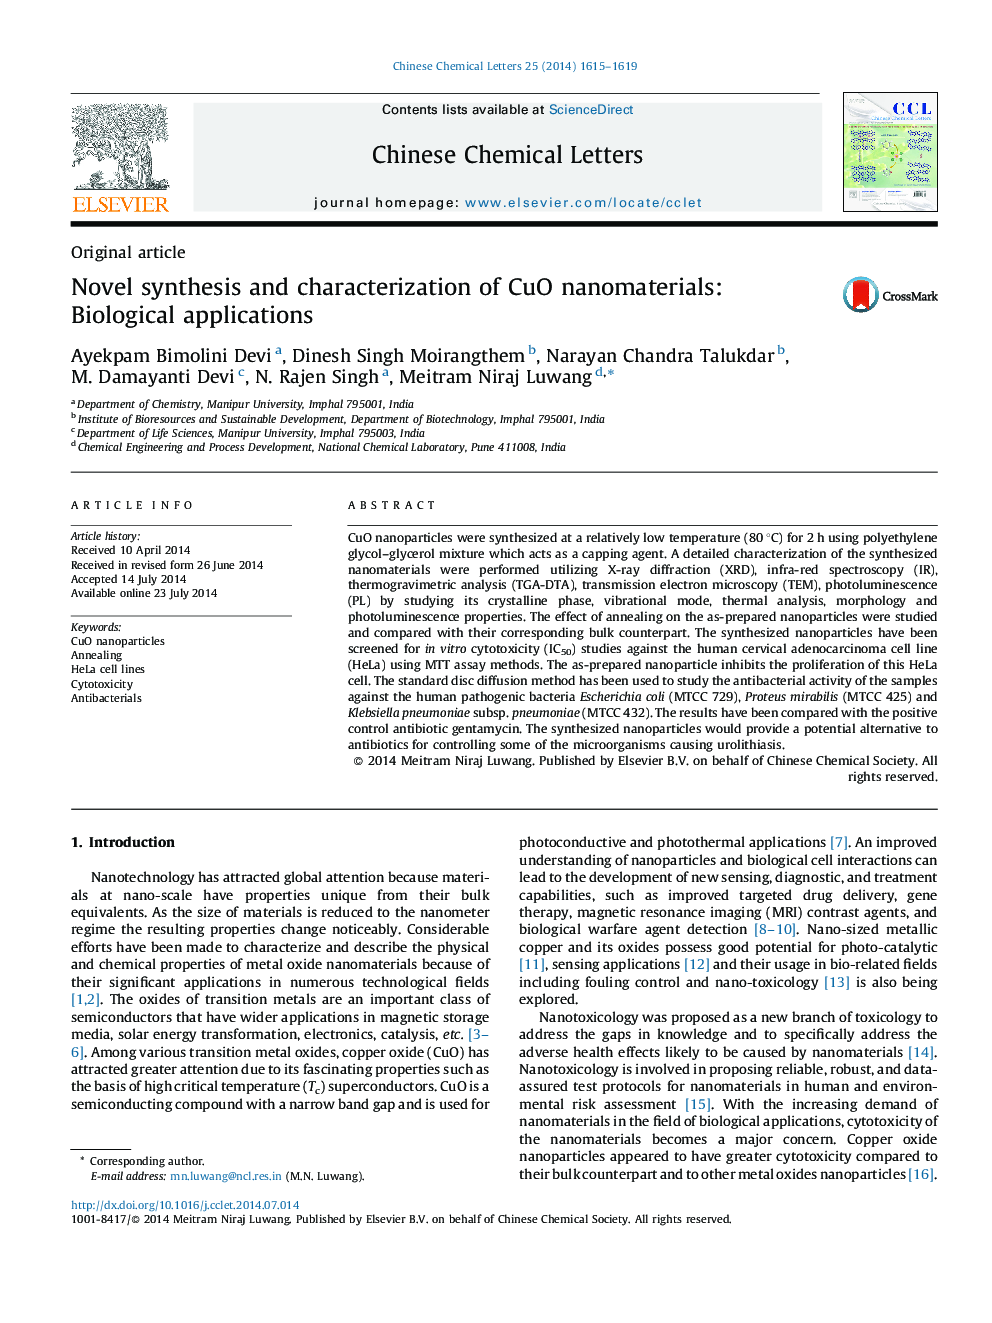 Novel synthesis and characterization of CuO nanomaterials: Biological applications